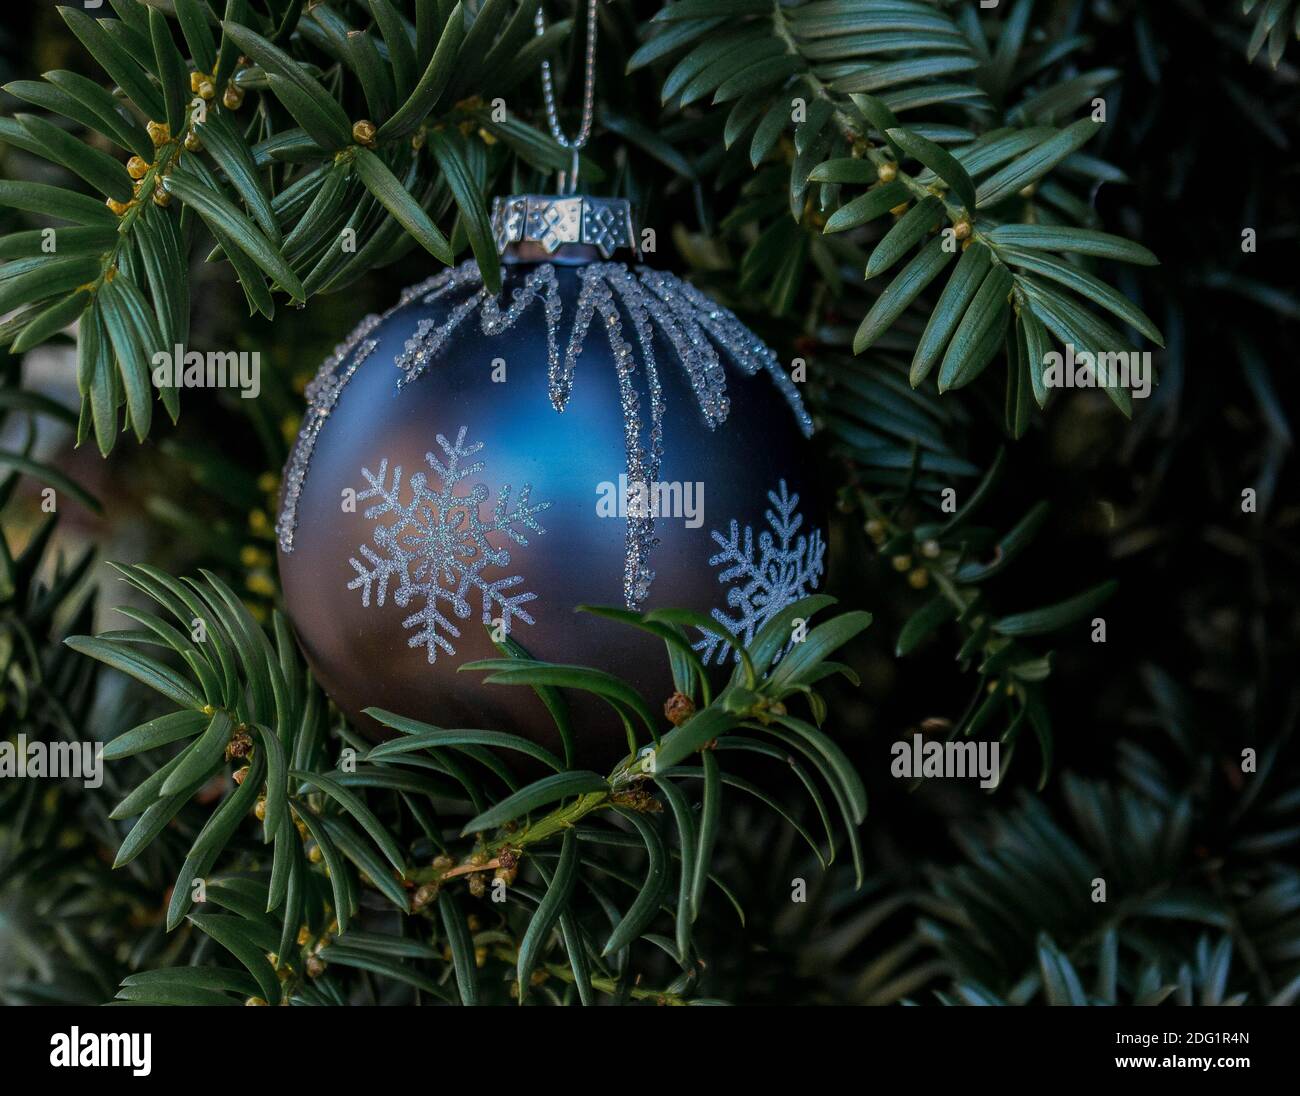 single christmas tree ball with snowflake design hanging in yew close up Stock Photo